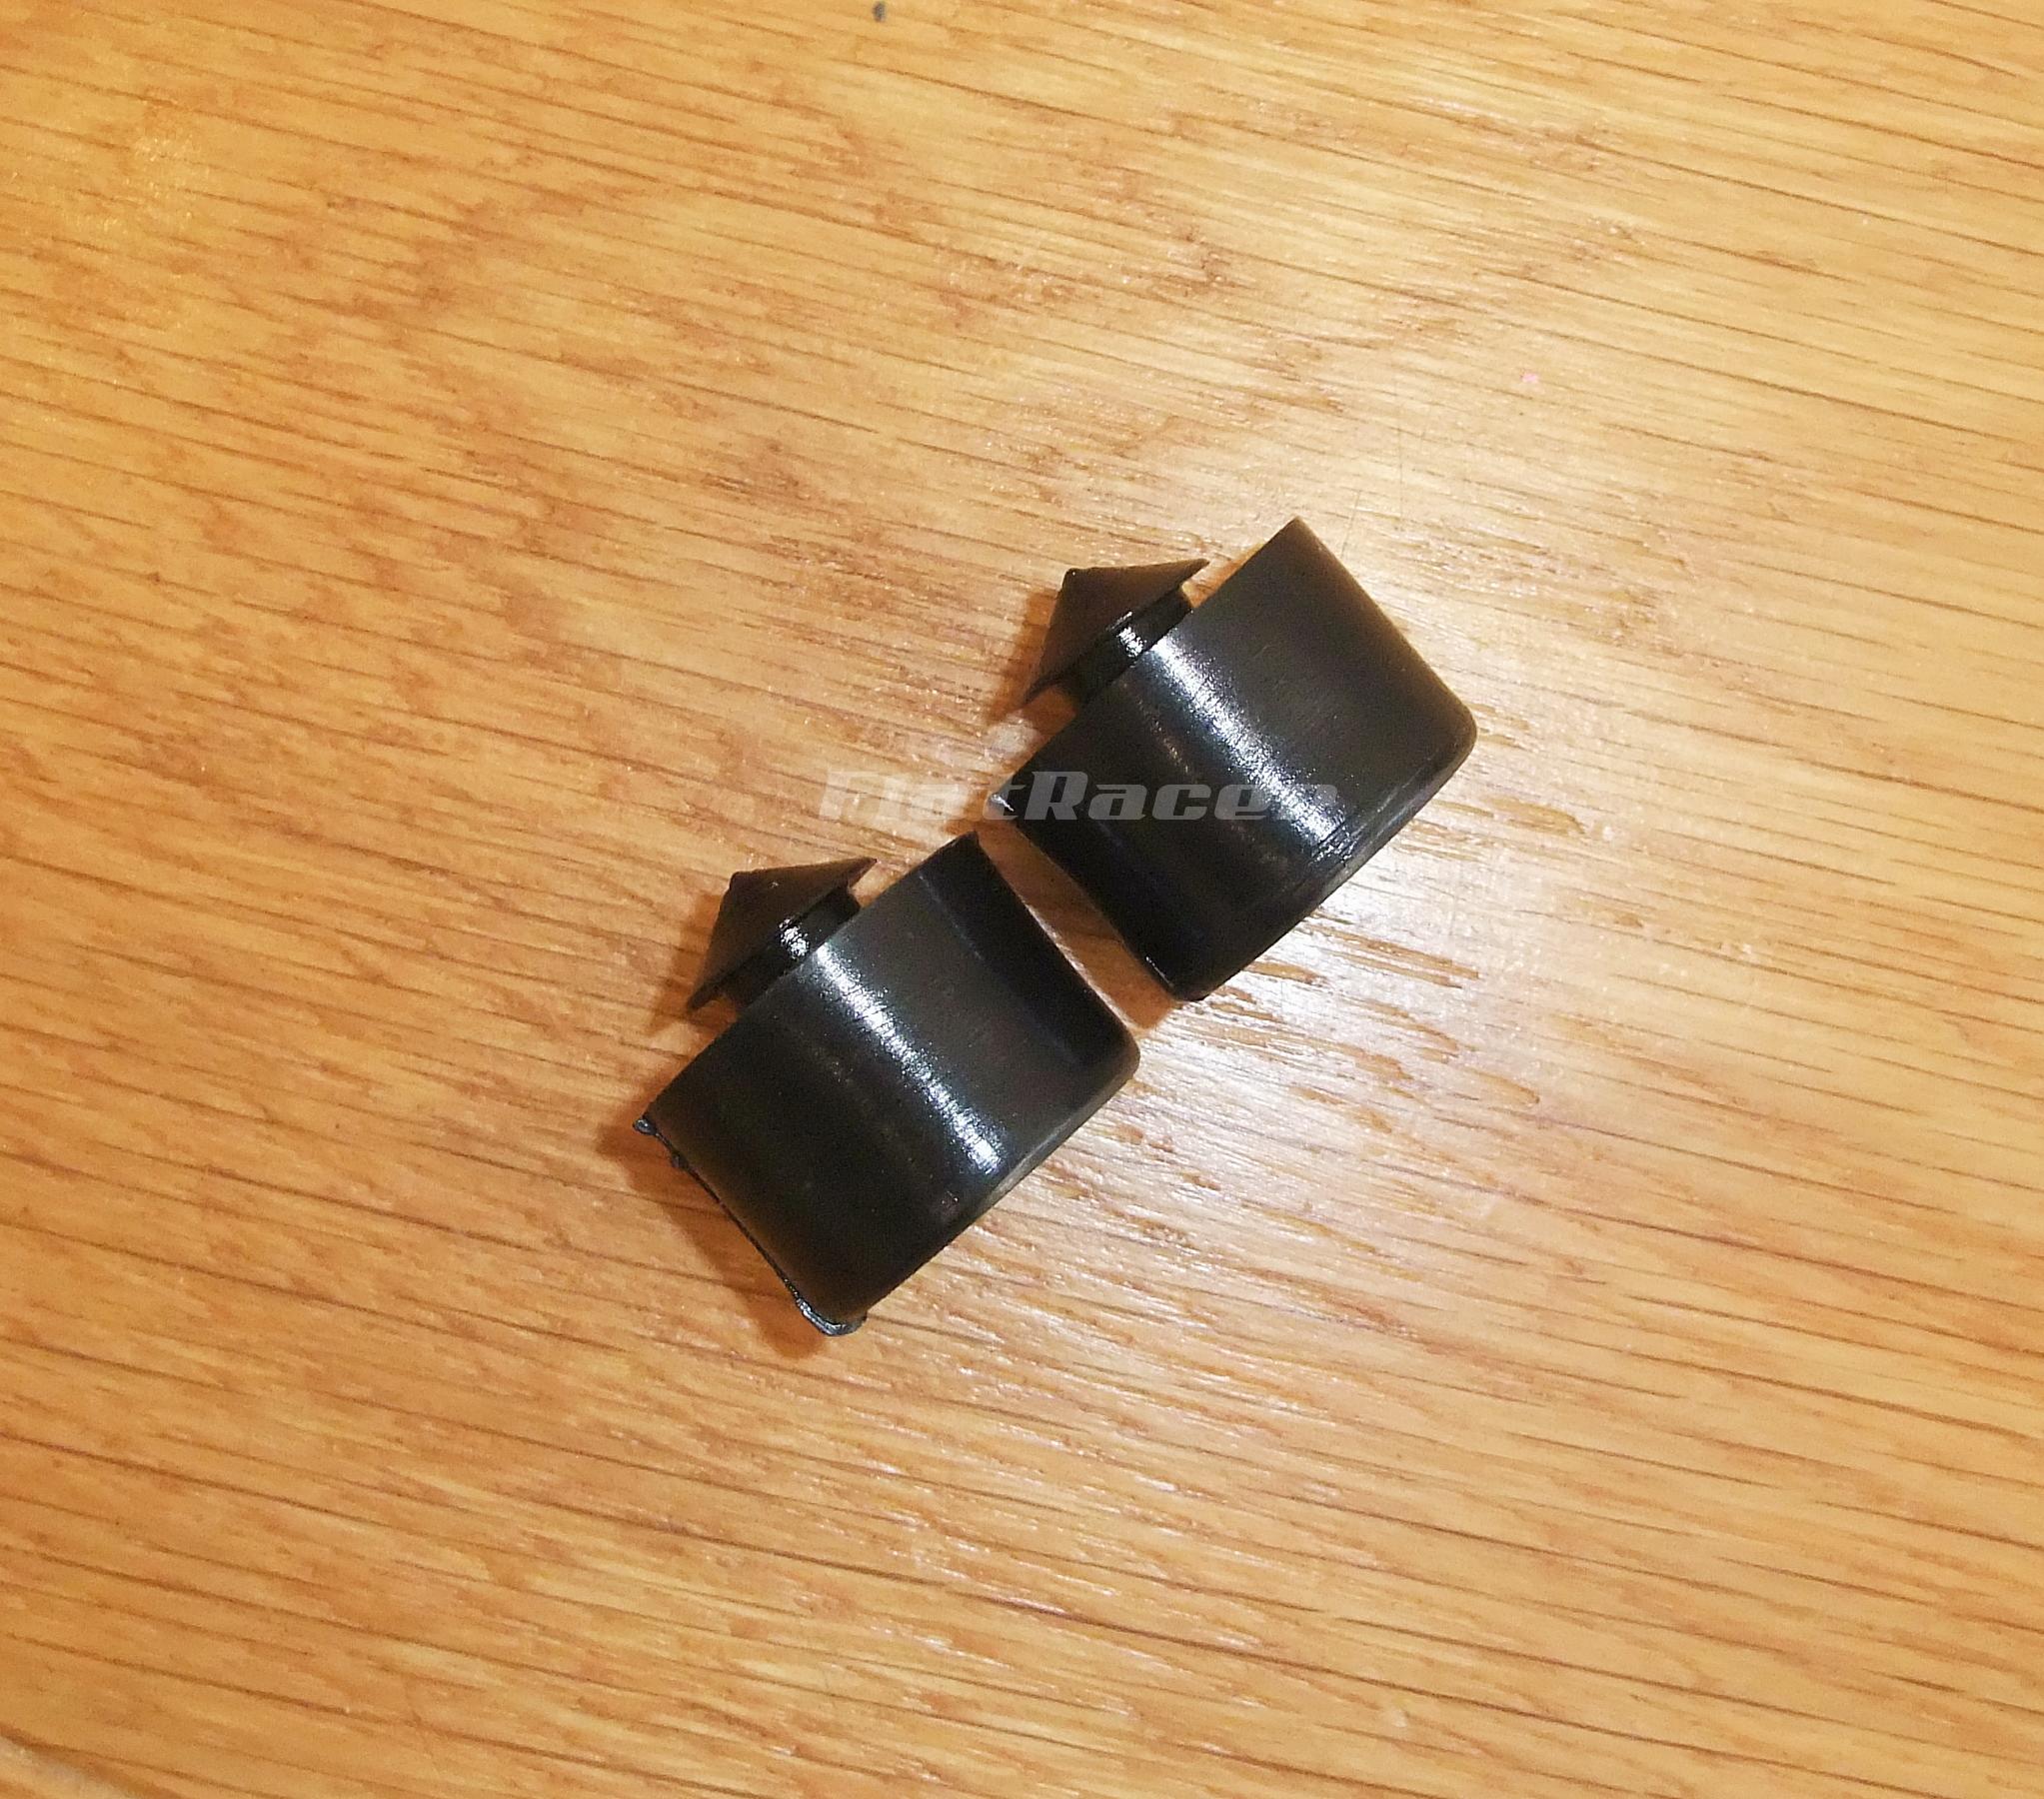 FlatRacer seat rubber buffer stops (pair) - 25 W x 16.5 H x 9mm hole